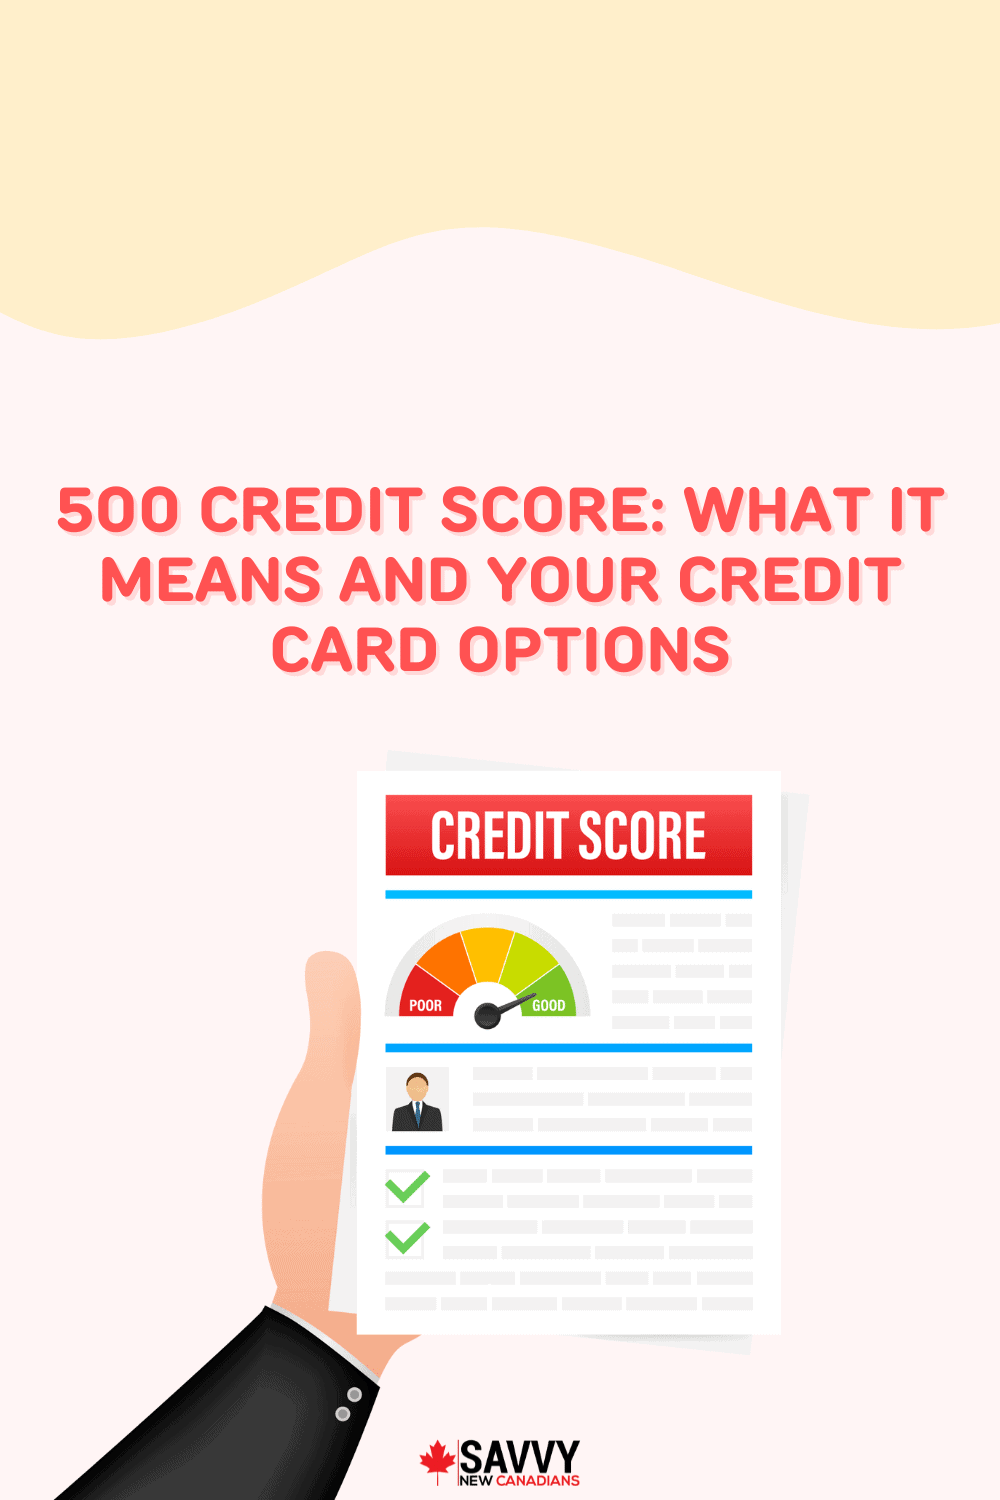 500 Credit Score: What It Means and Your Credit Card Options